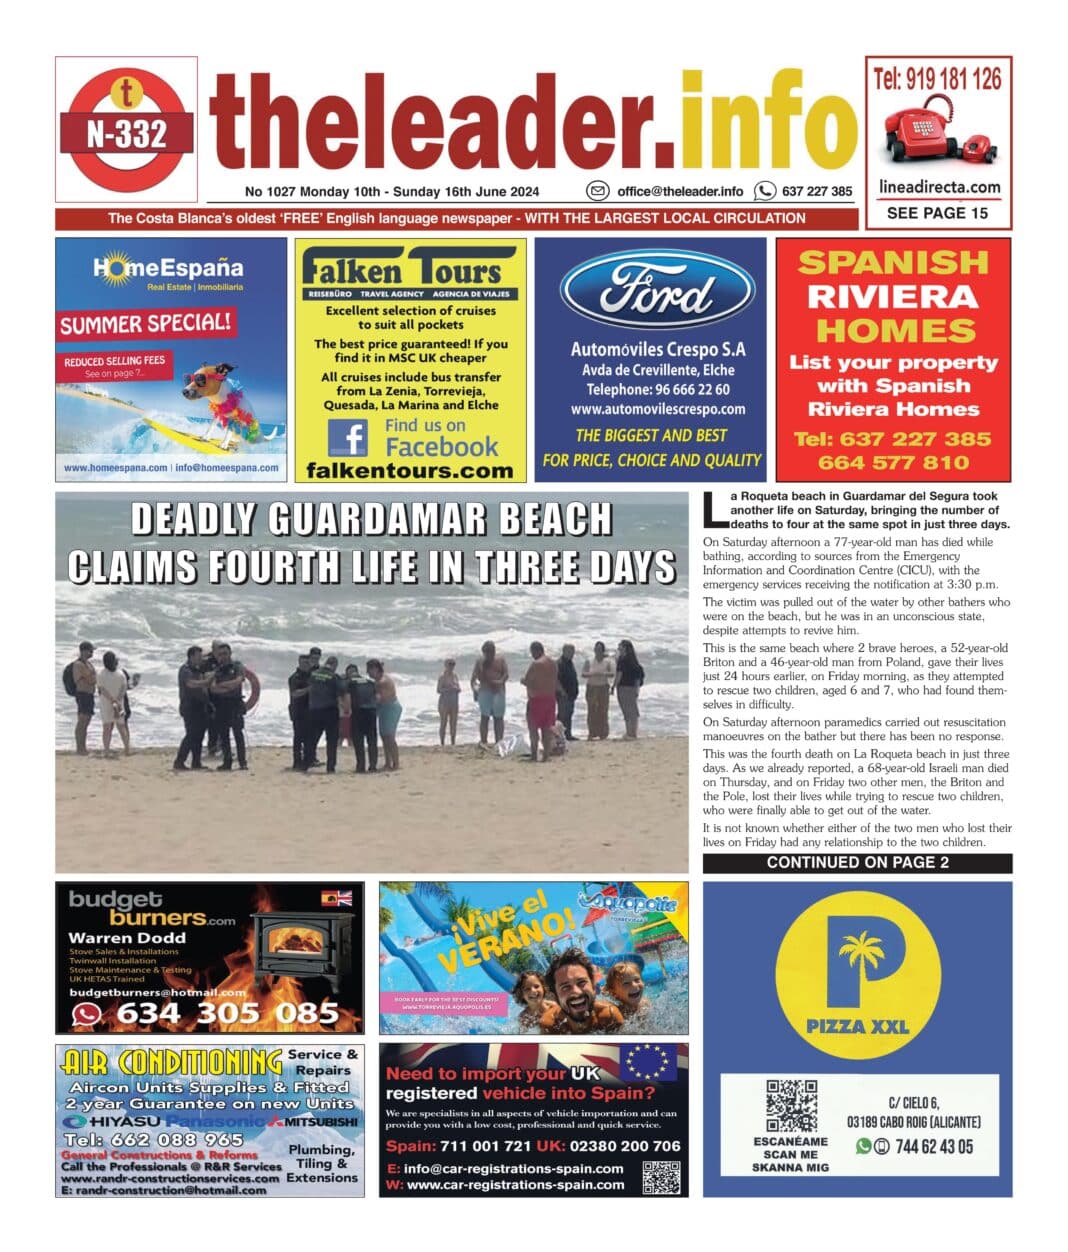 The Leader Newspaper edition 1027. 10 June 2024